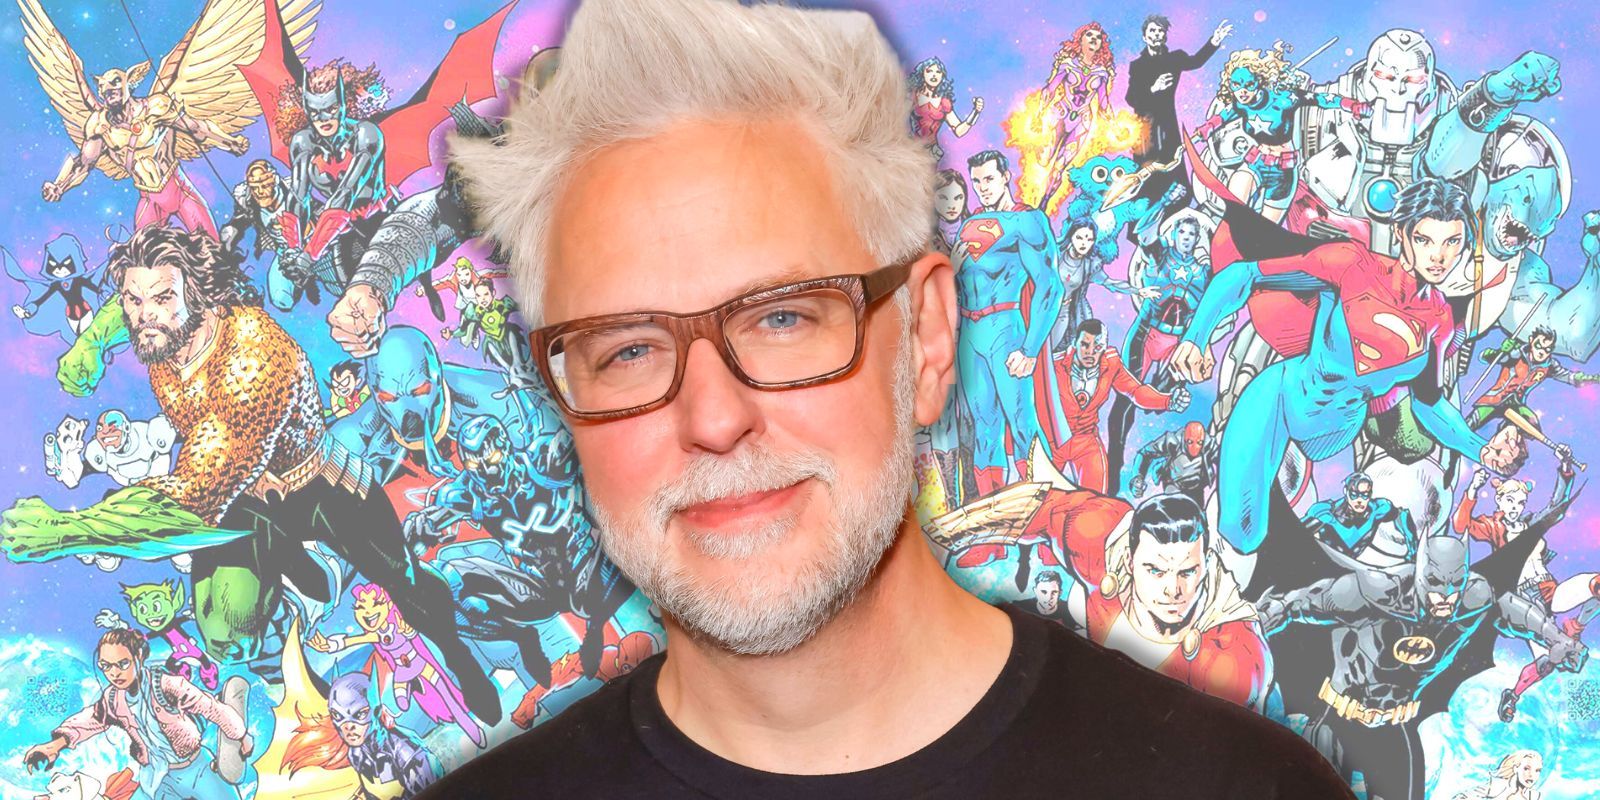 James Gunn backed by the roster of the DCU